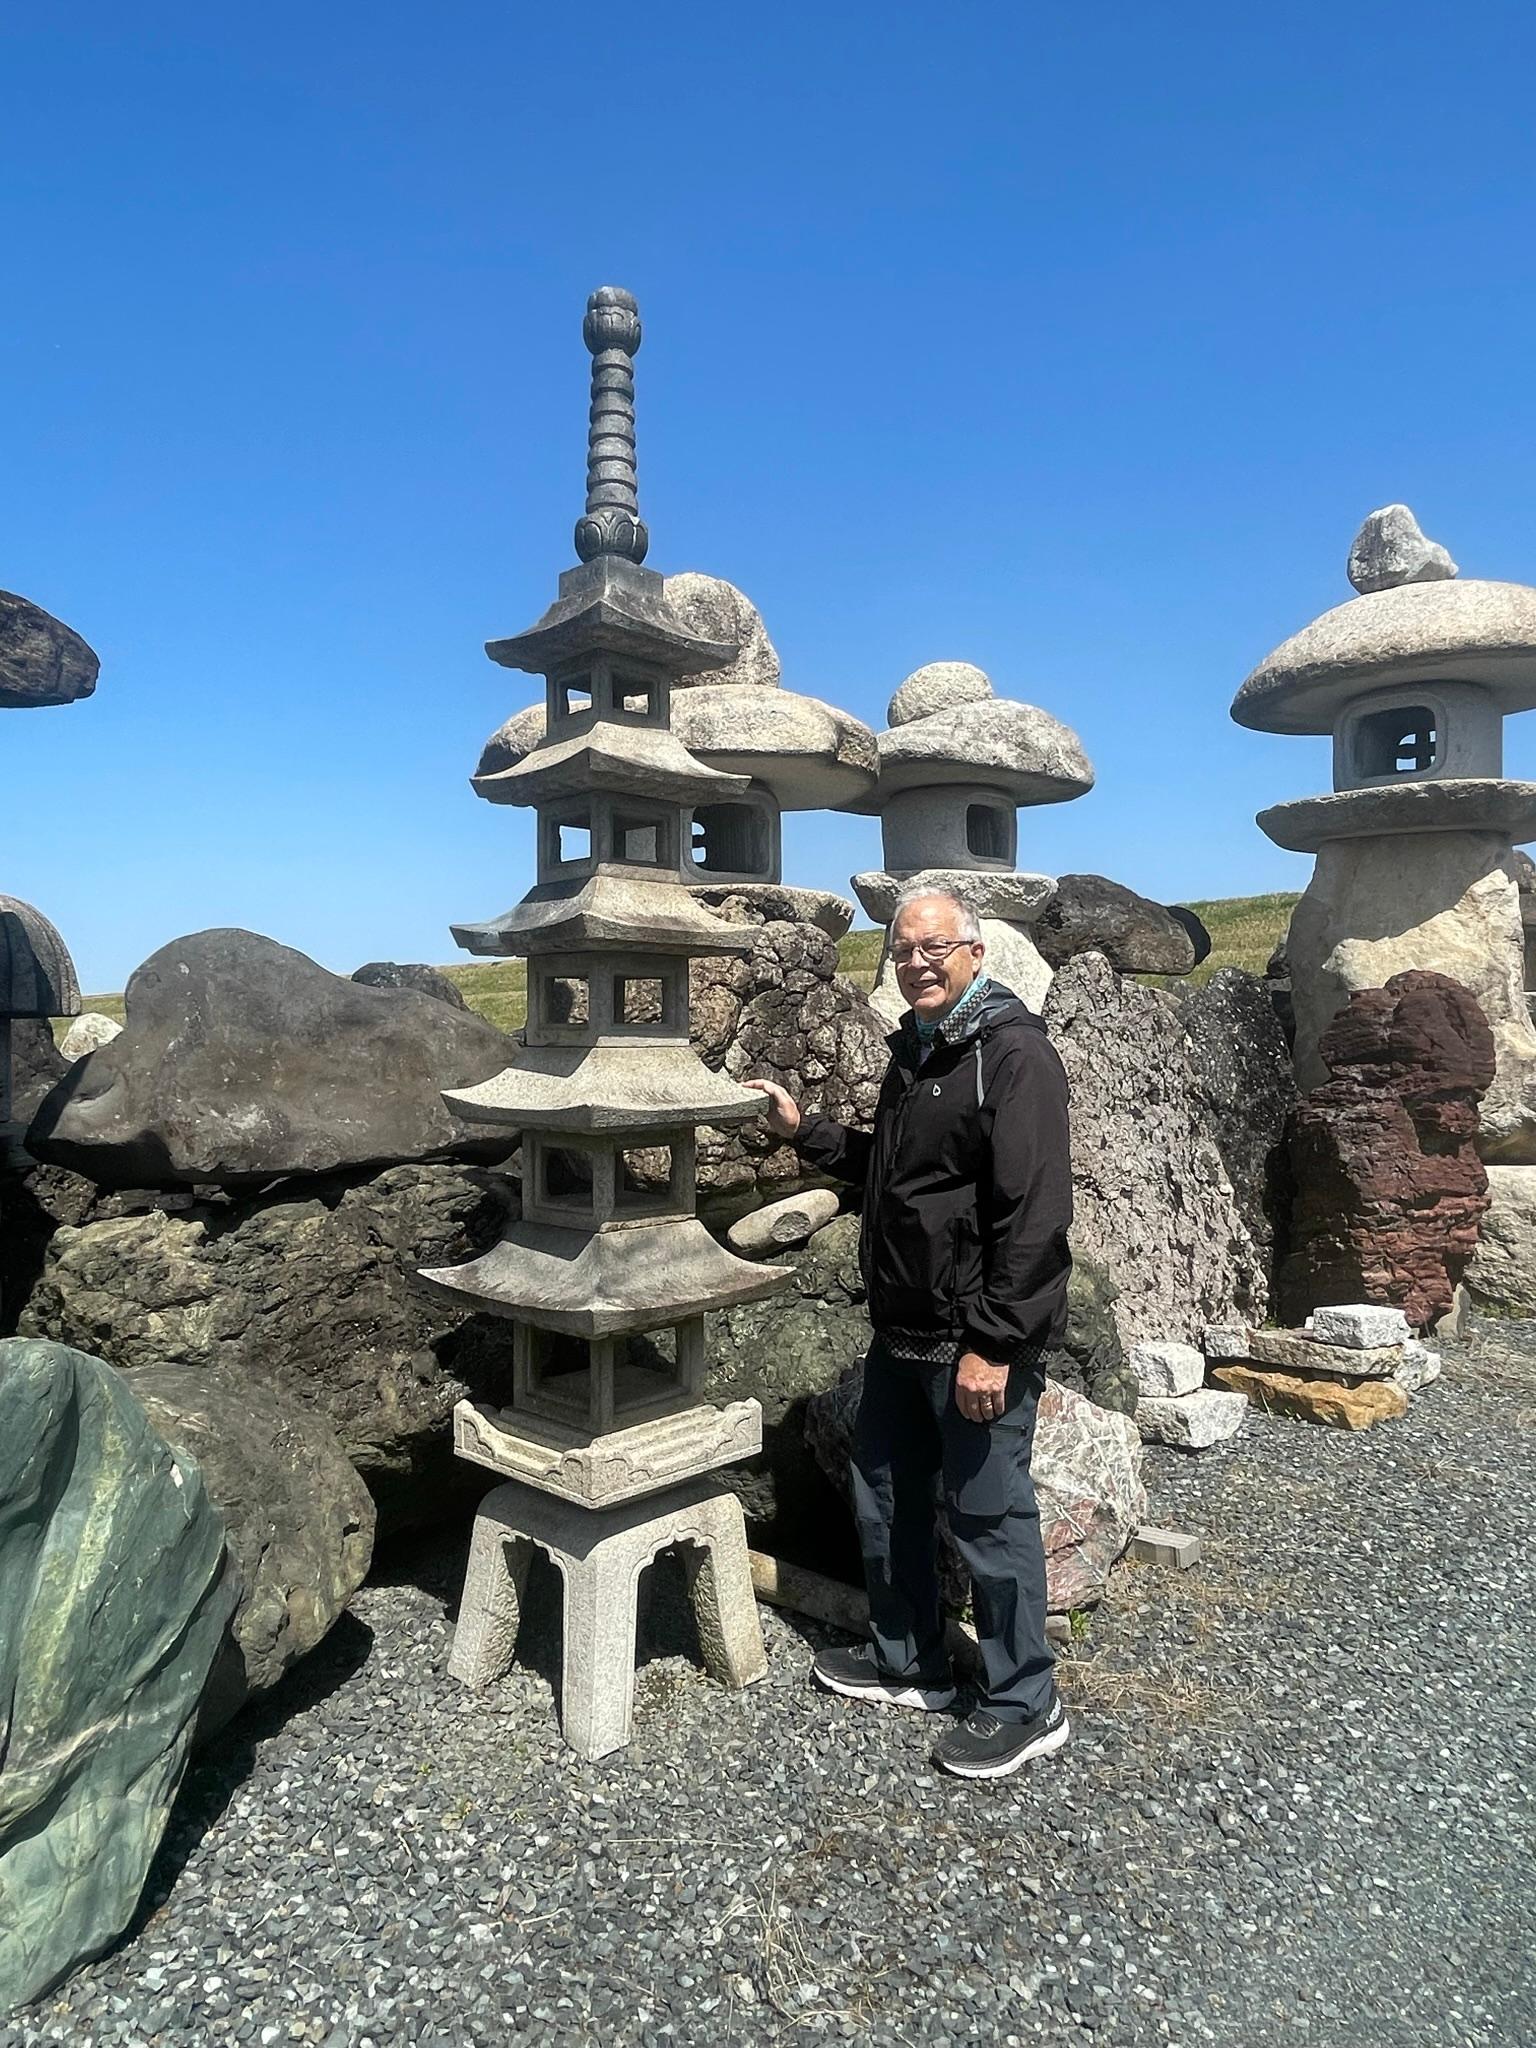 Fine Garden Sculpture

A spiritual representation of five earthly and celestial elements destined for a fine garden.

This Japanese monumental antique stone pagoda tower is about four meters or 128” tall. It is hand carved from solid granite from